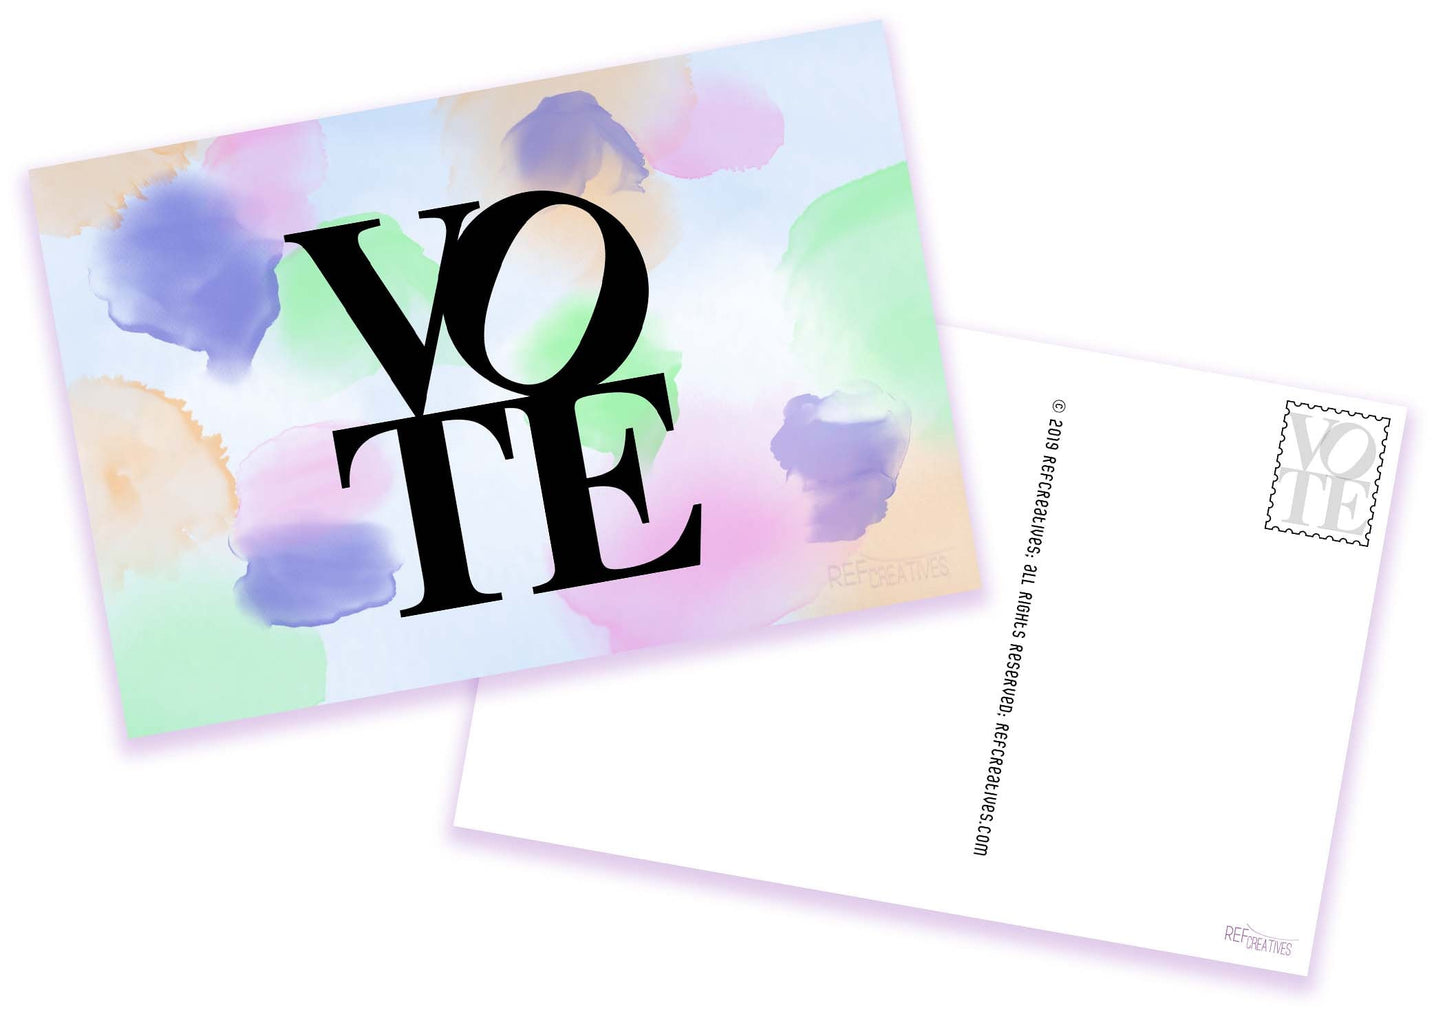 50 pack Postcards to Voters "VOTE in Watercolor" Vote Postcard